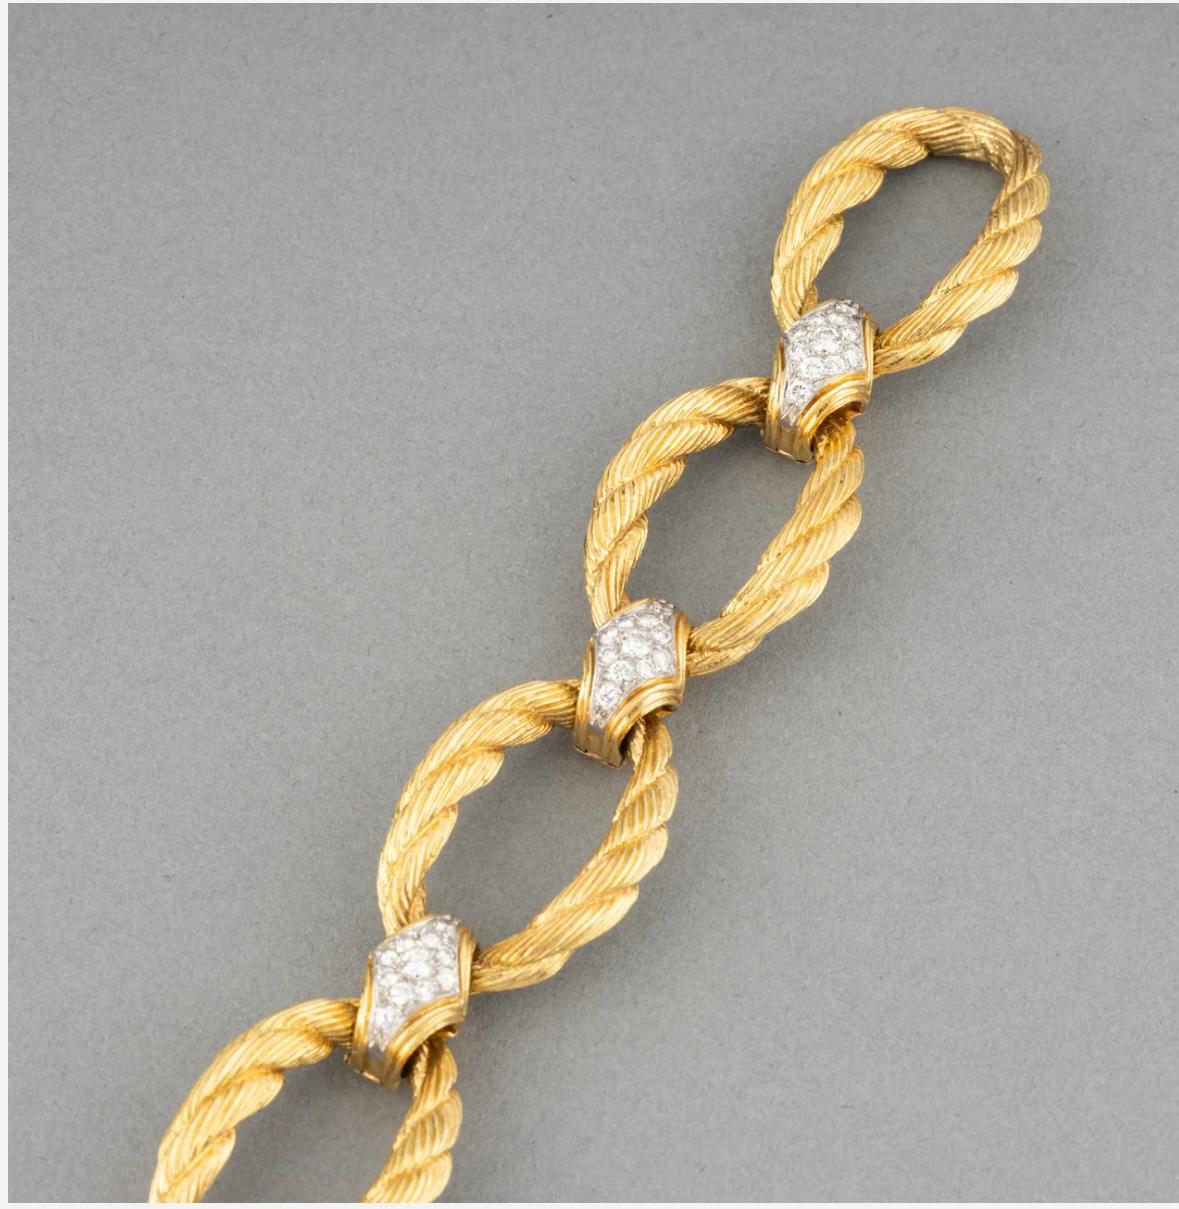 This Fantastic French 18k yellow gold and Diamond Link Bracelet is a staple addition to your jewelry collection.The bracelet is 7.25 inches long with 2.0 carats of brilliant cut diamonds between each link. The bracelet is striking and easily worn